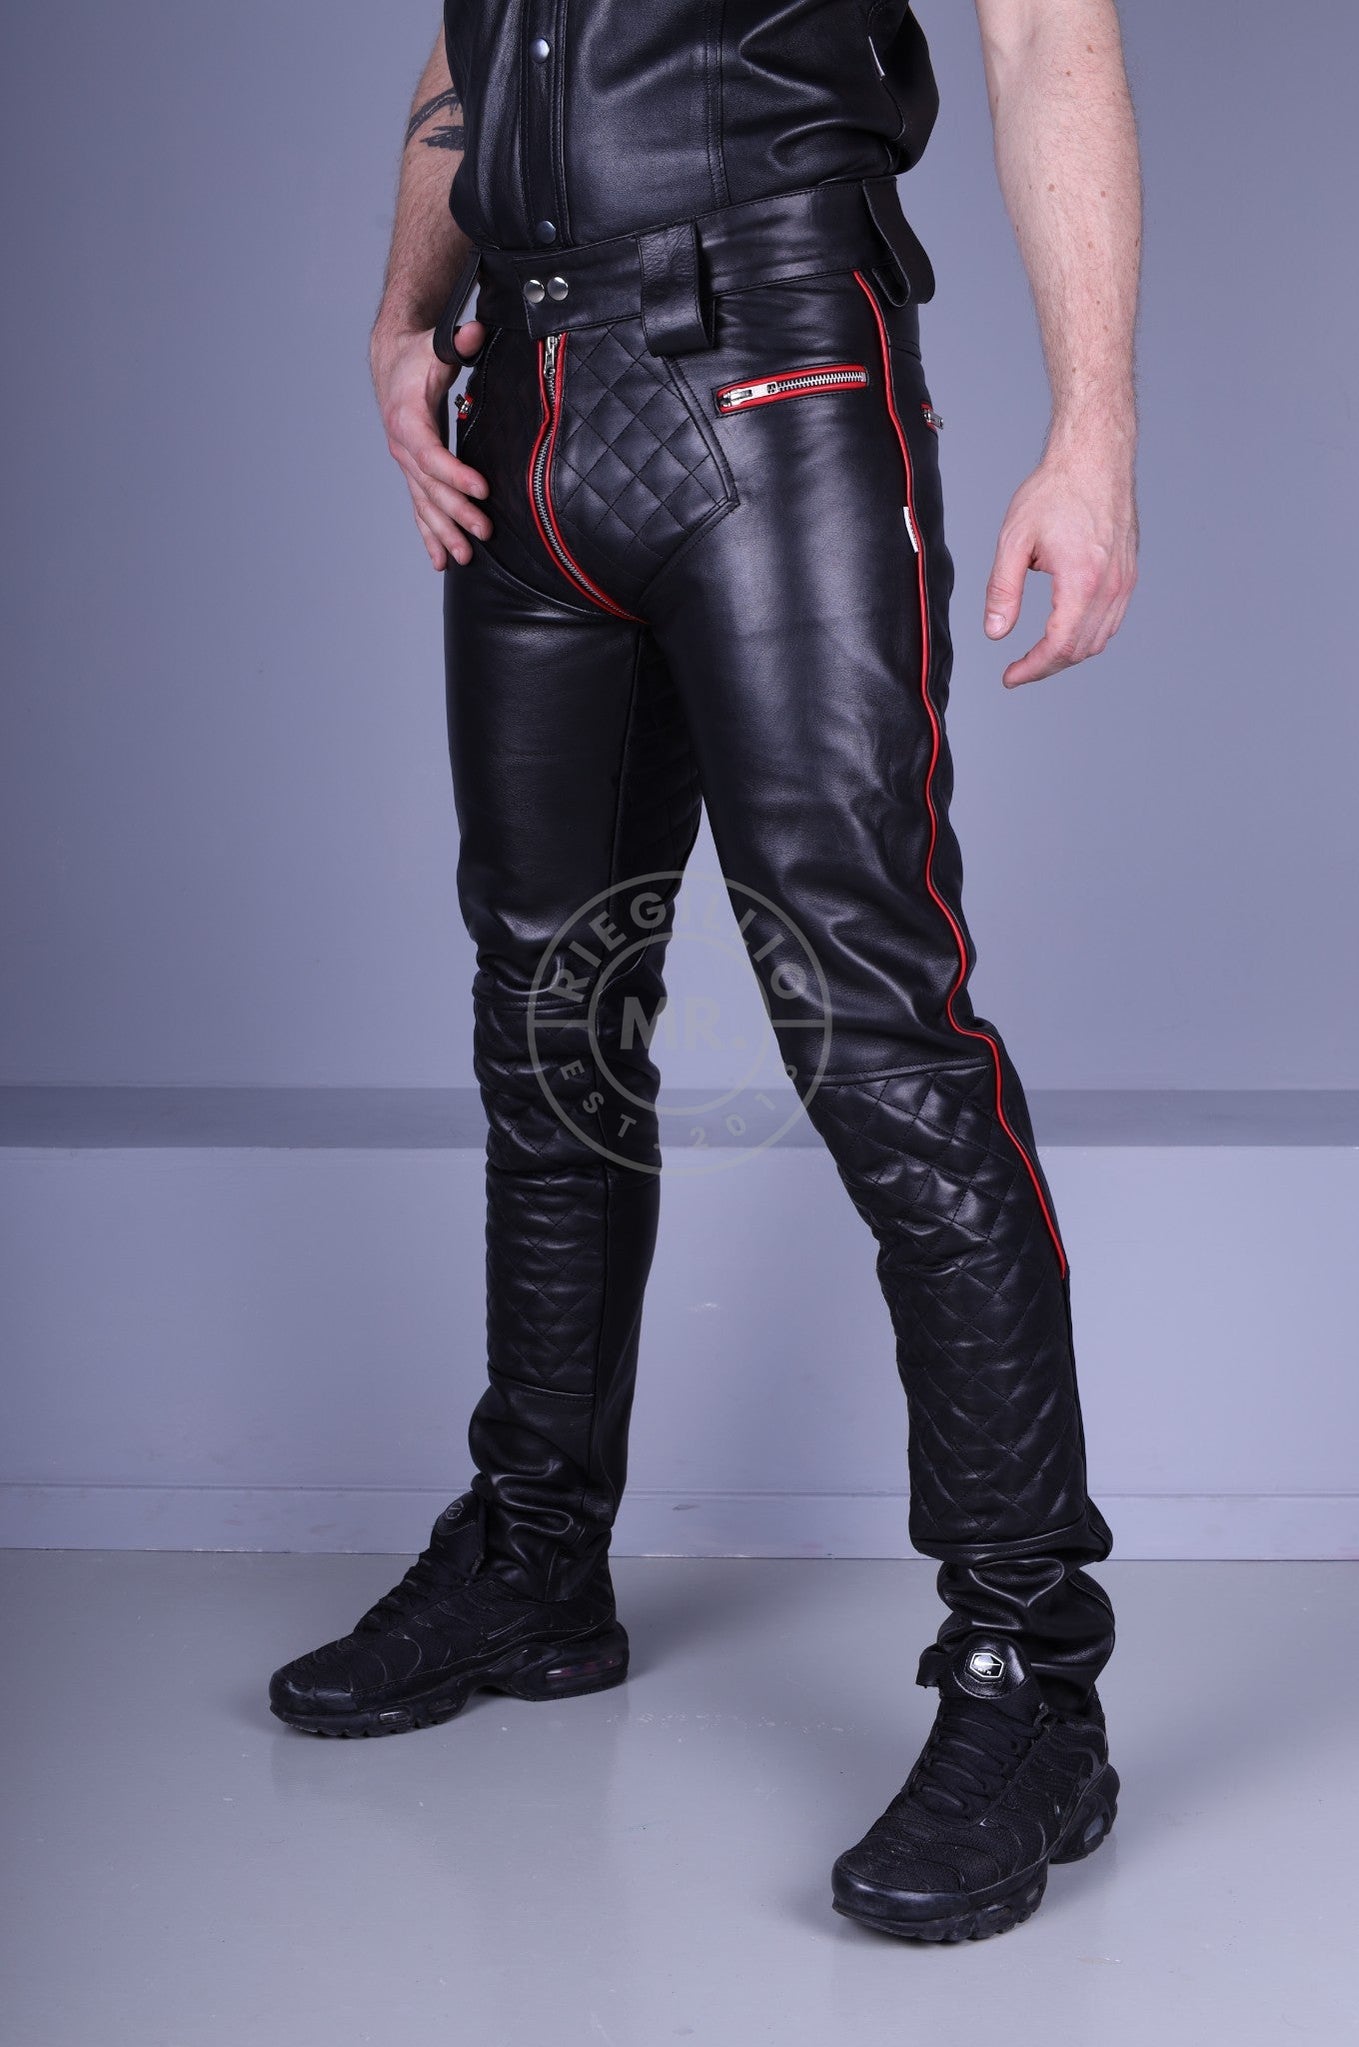 Padded Leather Pants - Red Piping by MR. Riegillio